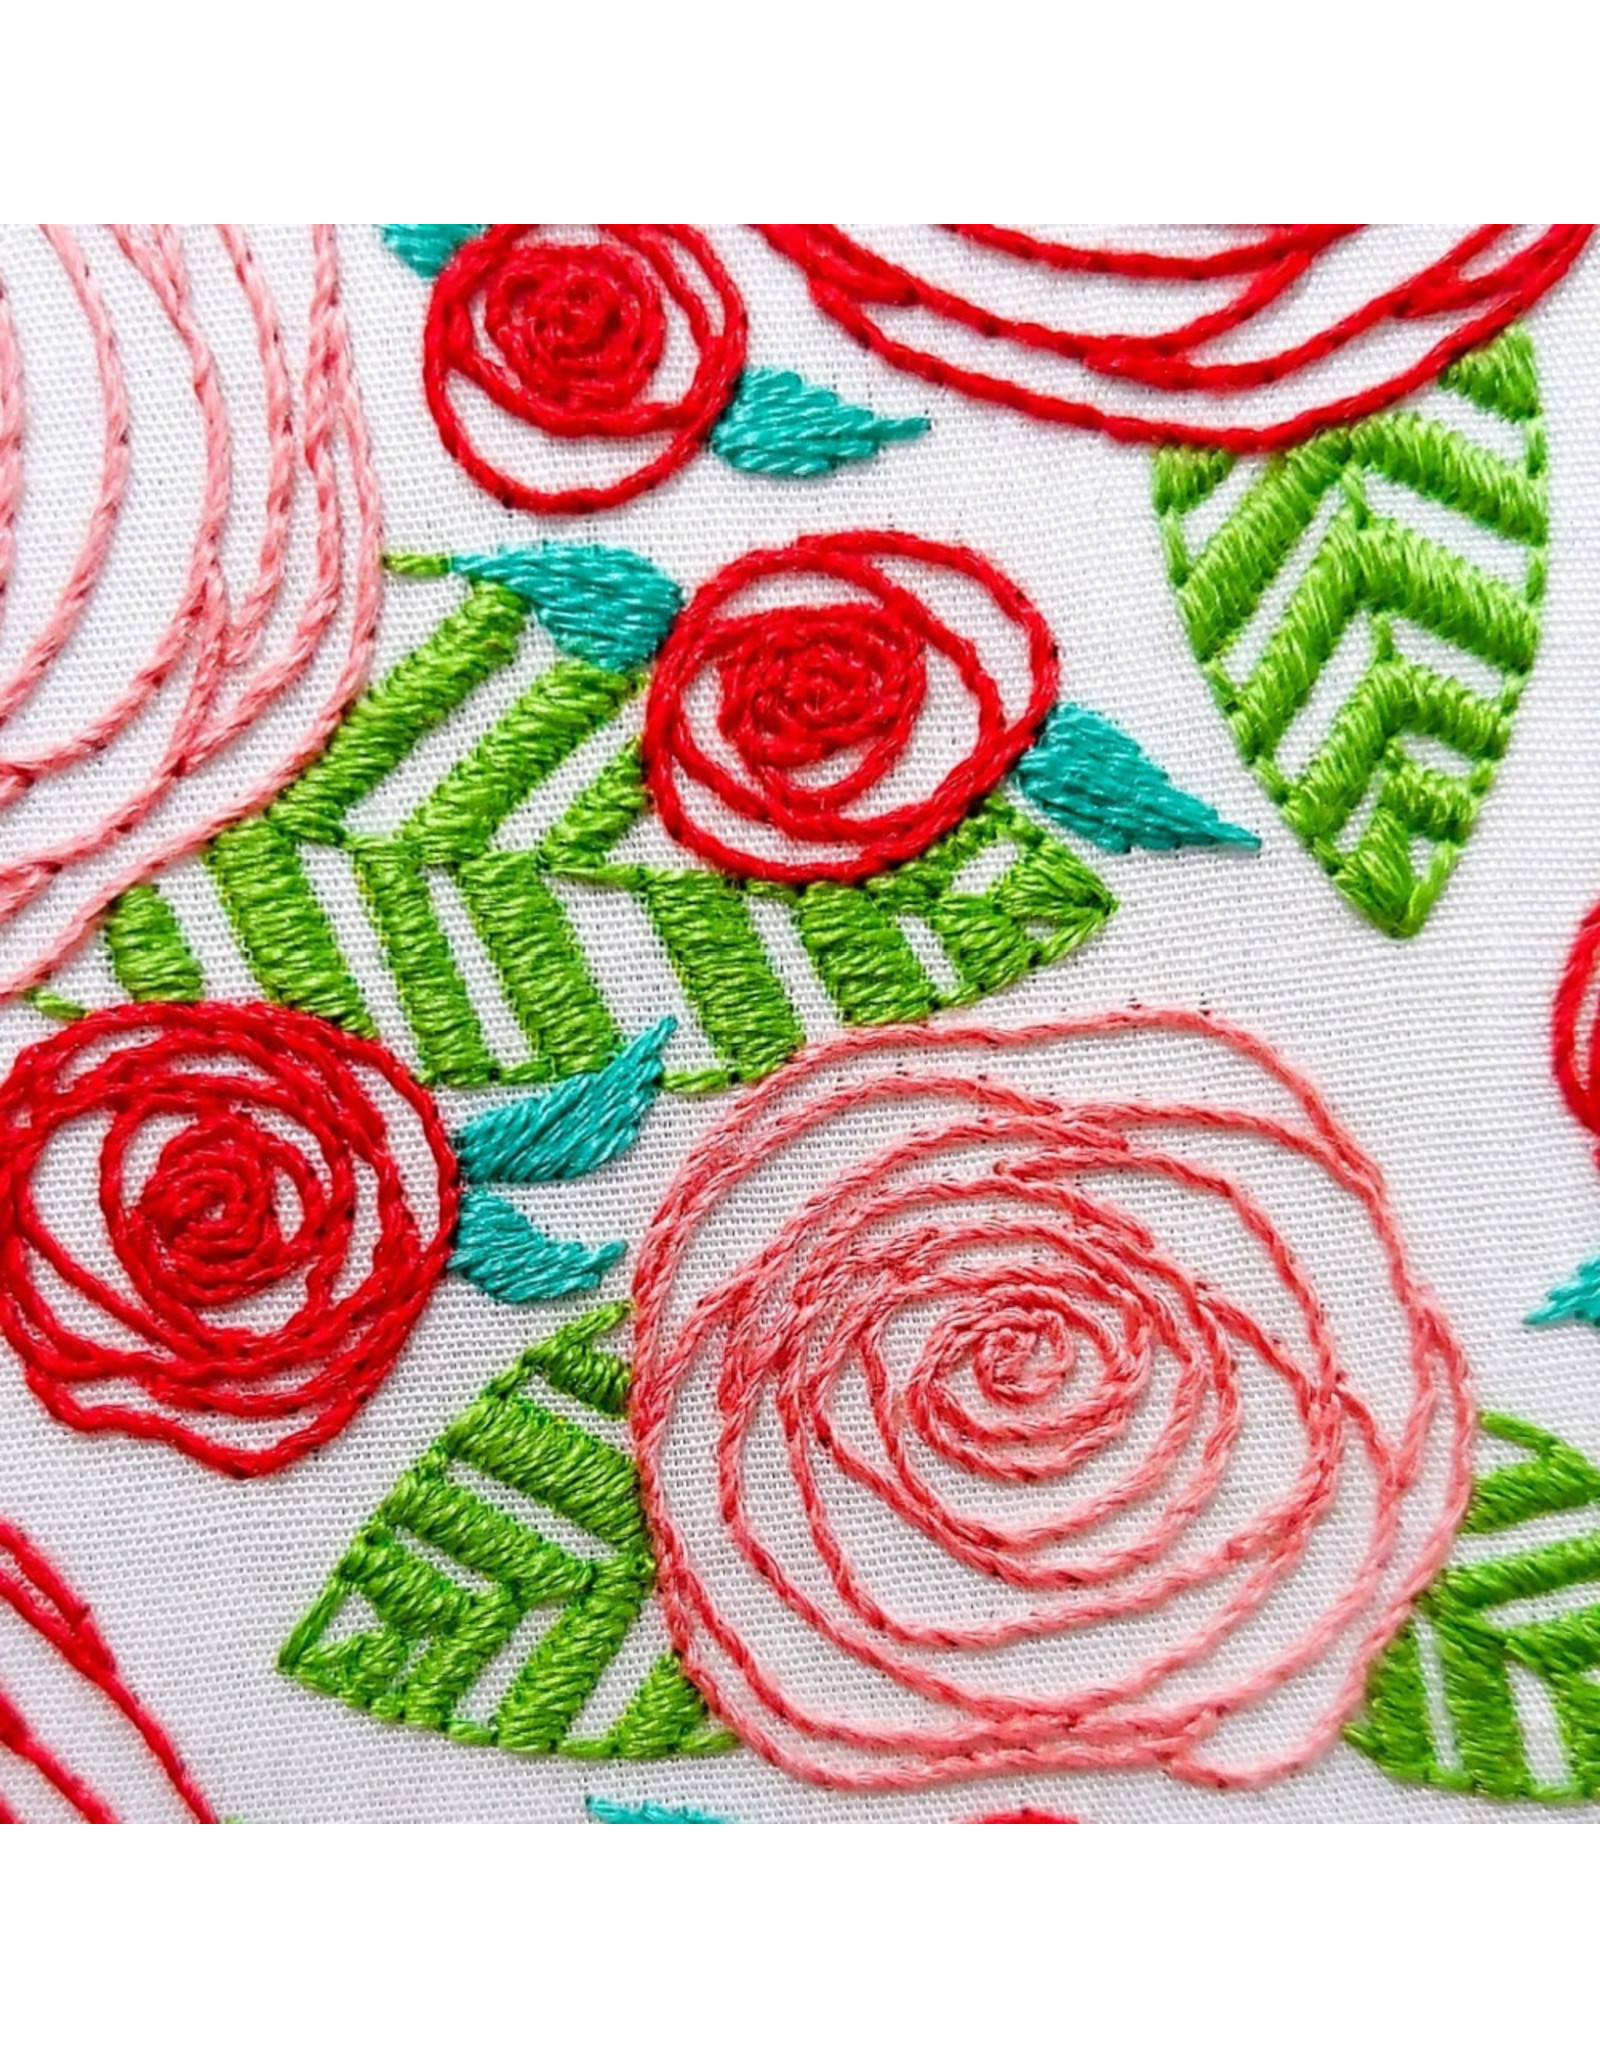 cozyblue Coming Up Roses Embroidery Kit from cozyblue